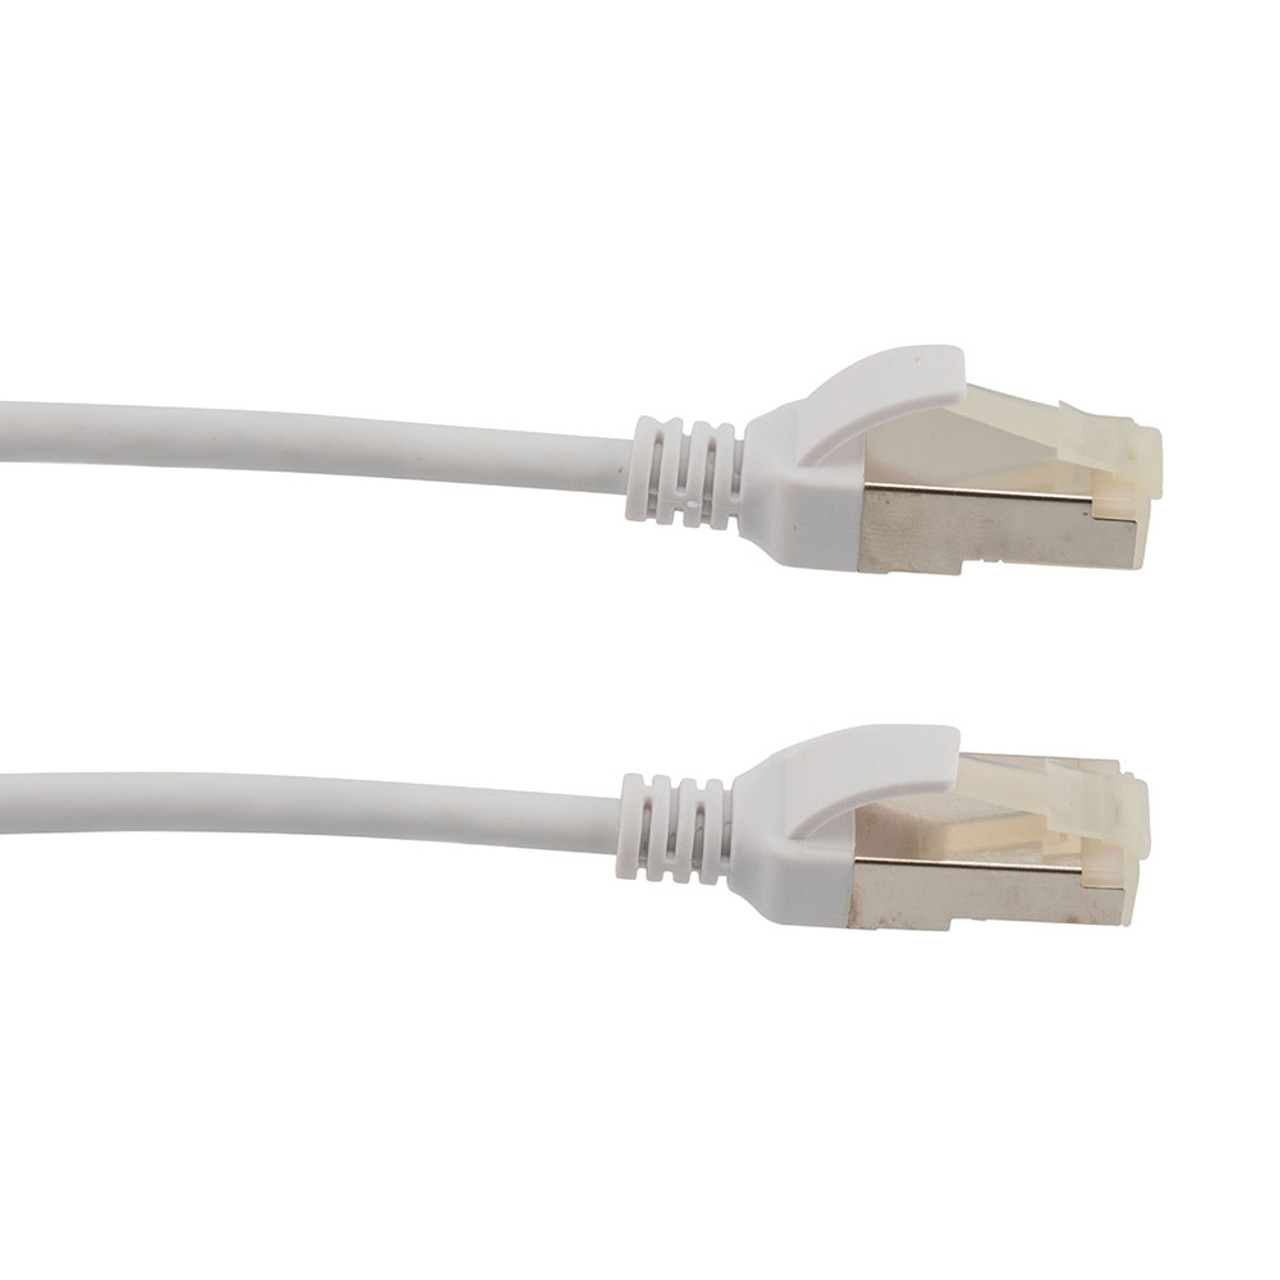 Category 6a 10 Gbps Slim Ethernet Antibacterial Antimicrobial Cable Assembly, RJ45 Male/Plug, S/FTP, 30 AWG, PVC Antibacterial, White, 15 FT